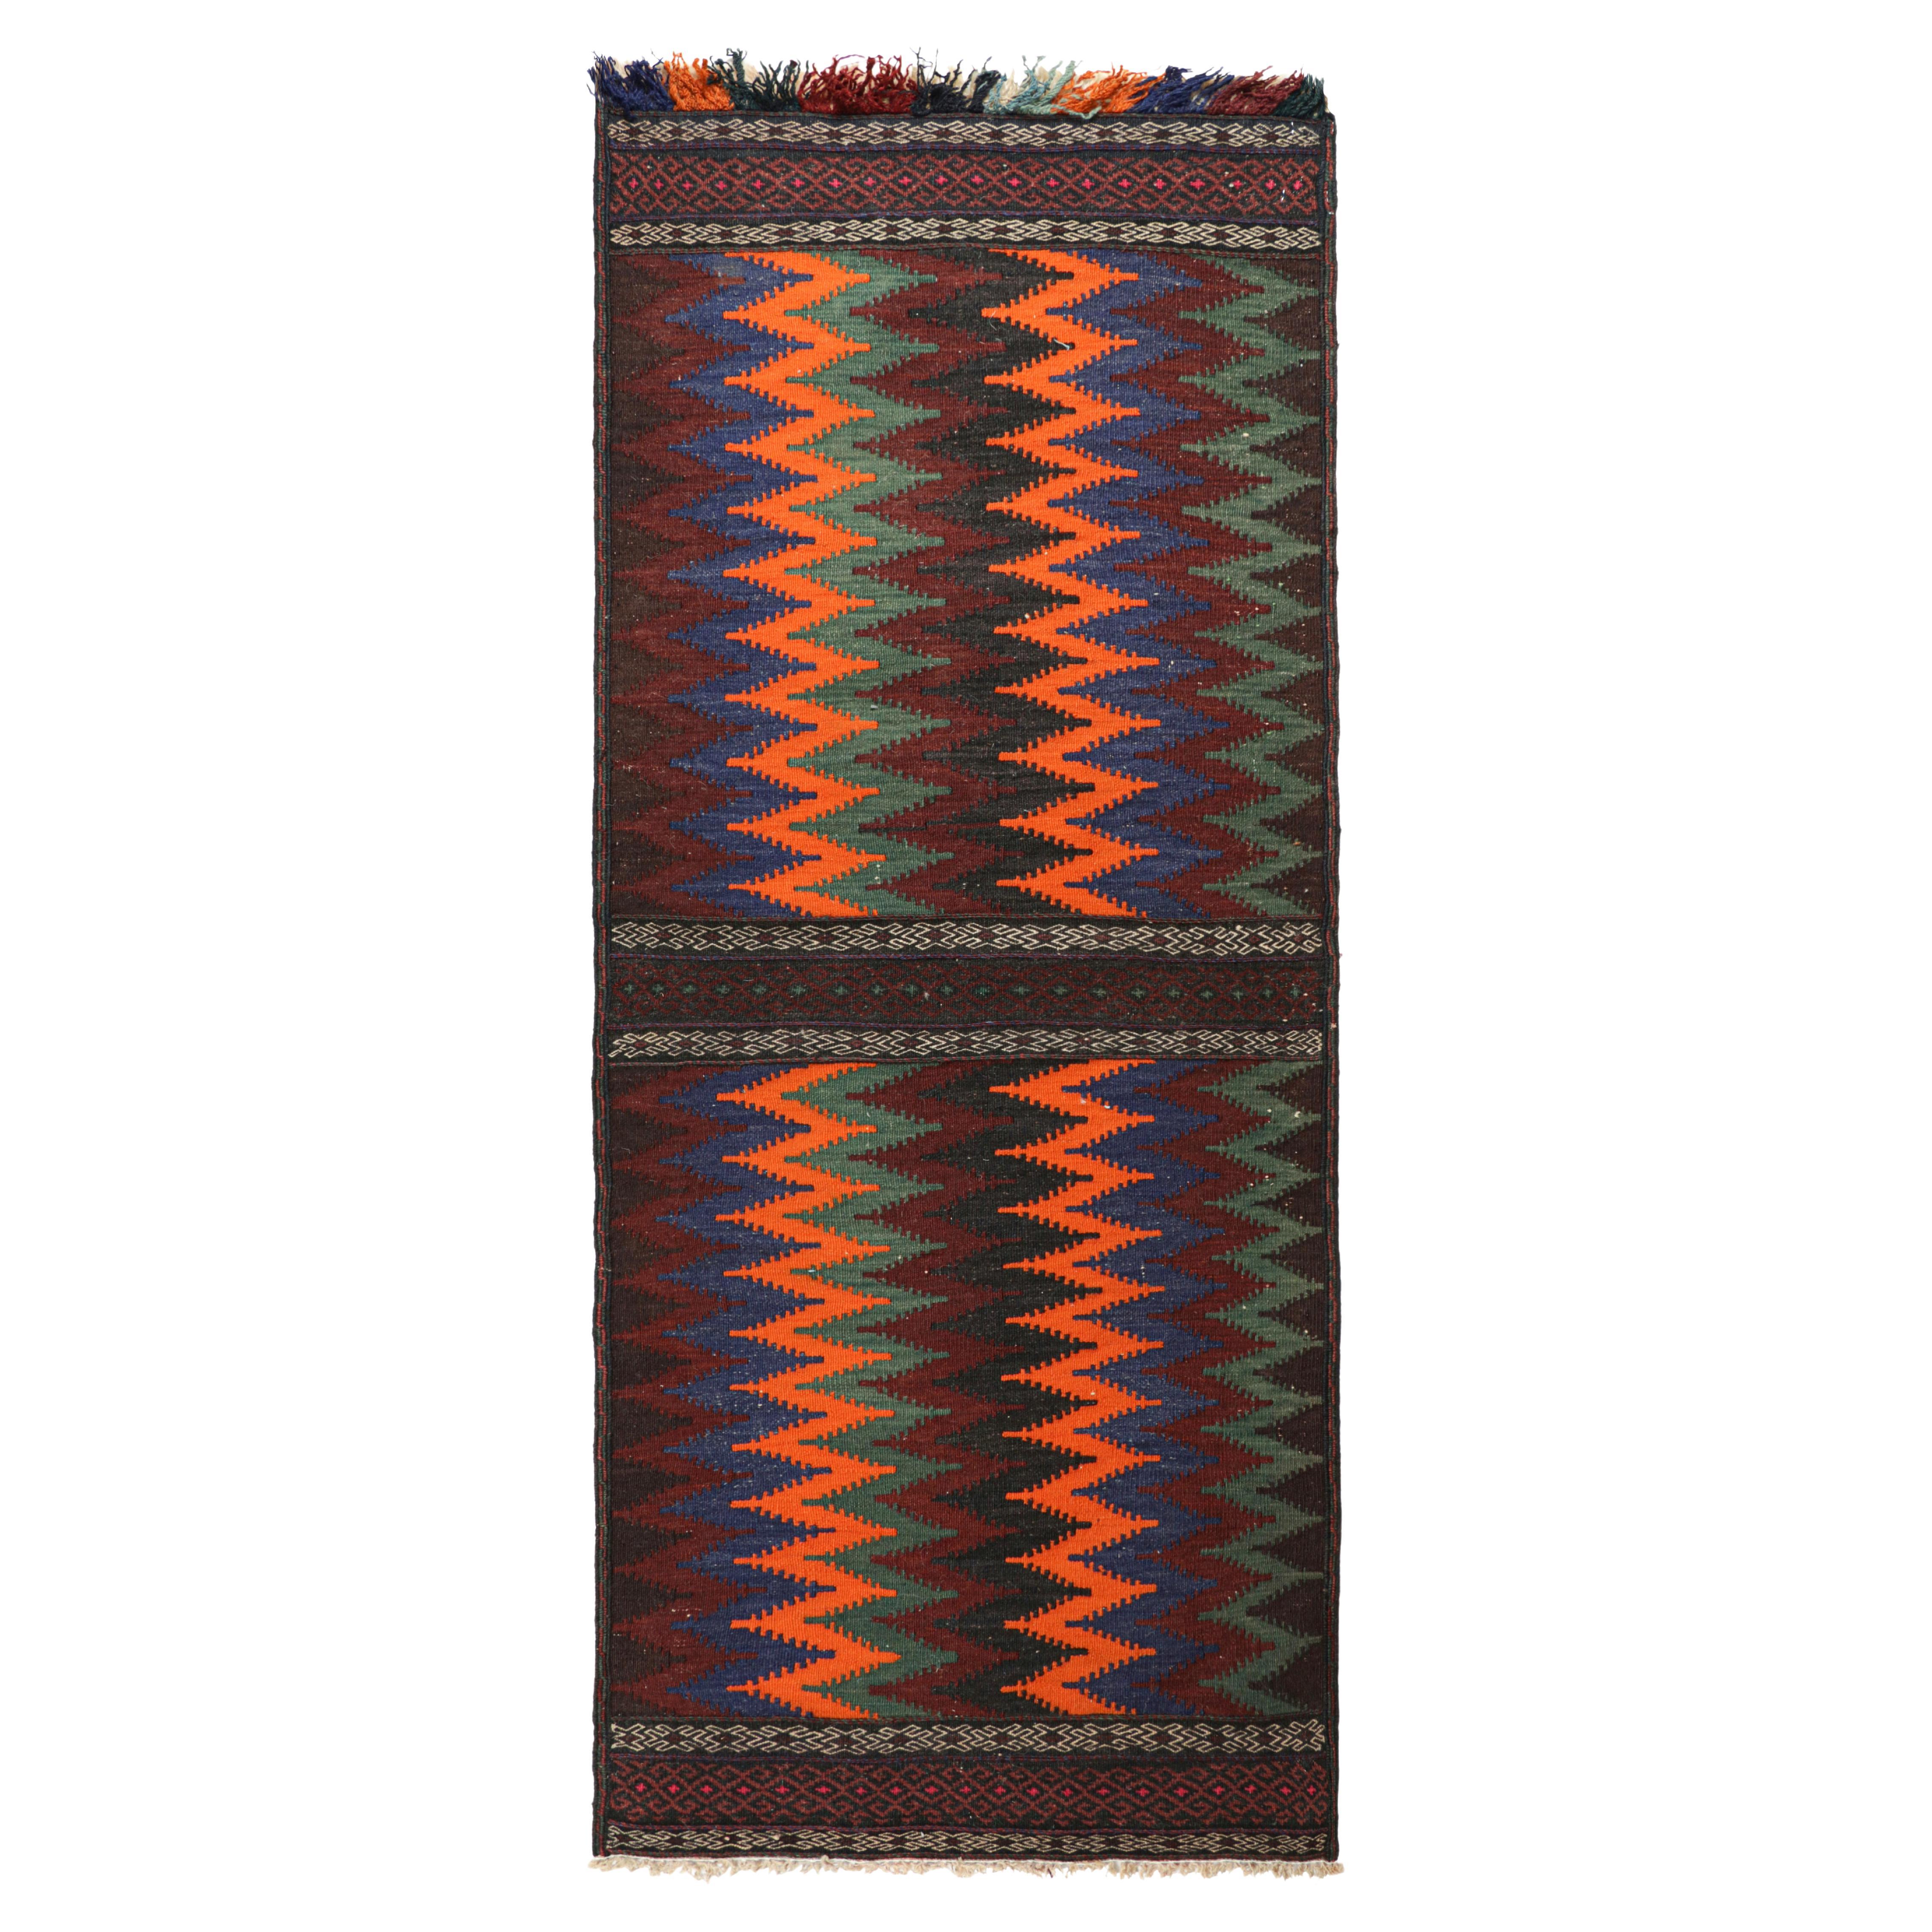 Vintage Afghan Kilim with Polychromatic Chevron Patterns, from Rug & Kilim For Sale